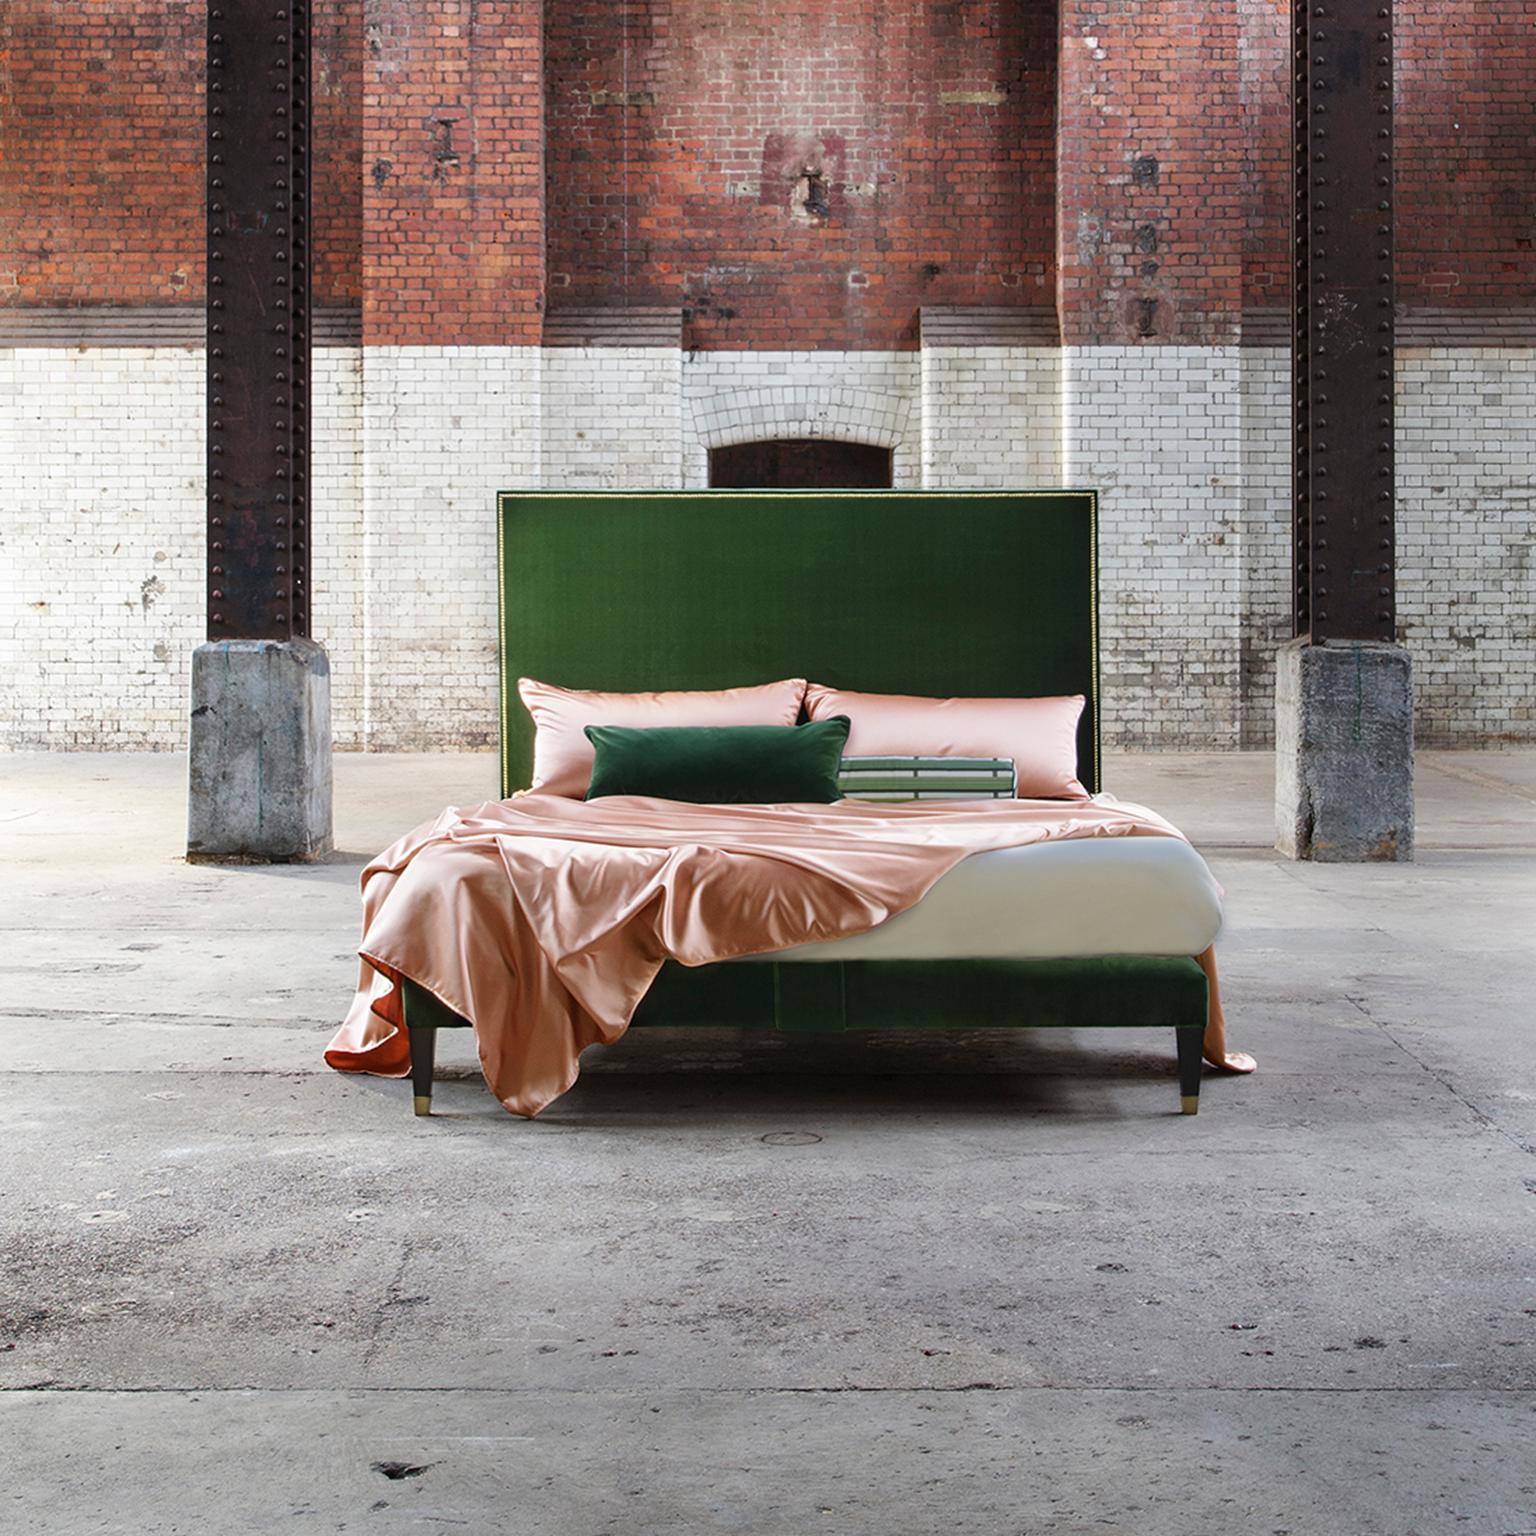 A Classic Savoir house design, the Harlech is a beautifully simple bed that adopts an angular, streamlined silhouette. Epitomising modern luxury, the headboard and base are upholstered in a rich hunter green velvet bordered with polished brass